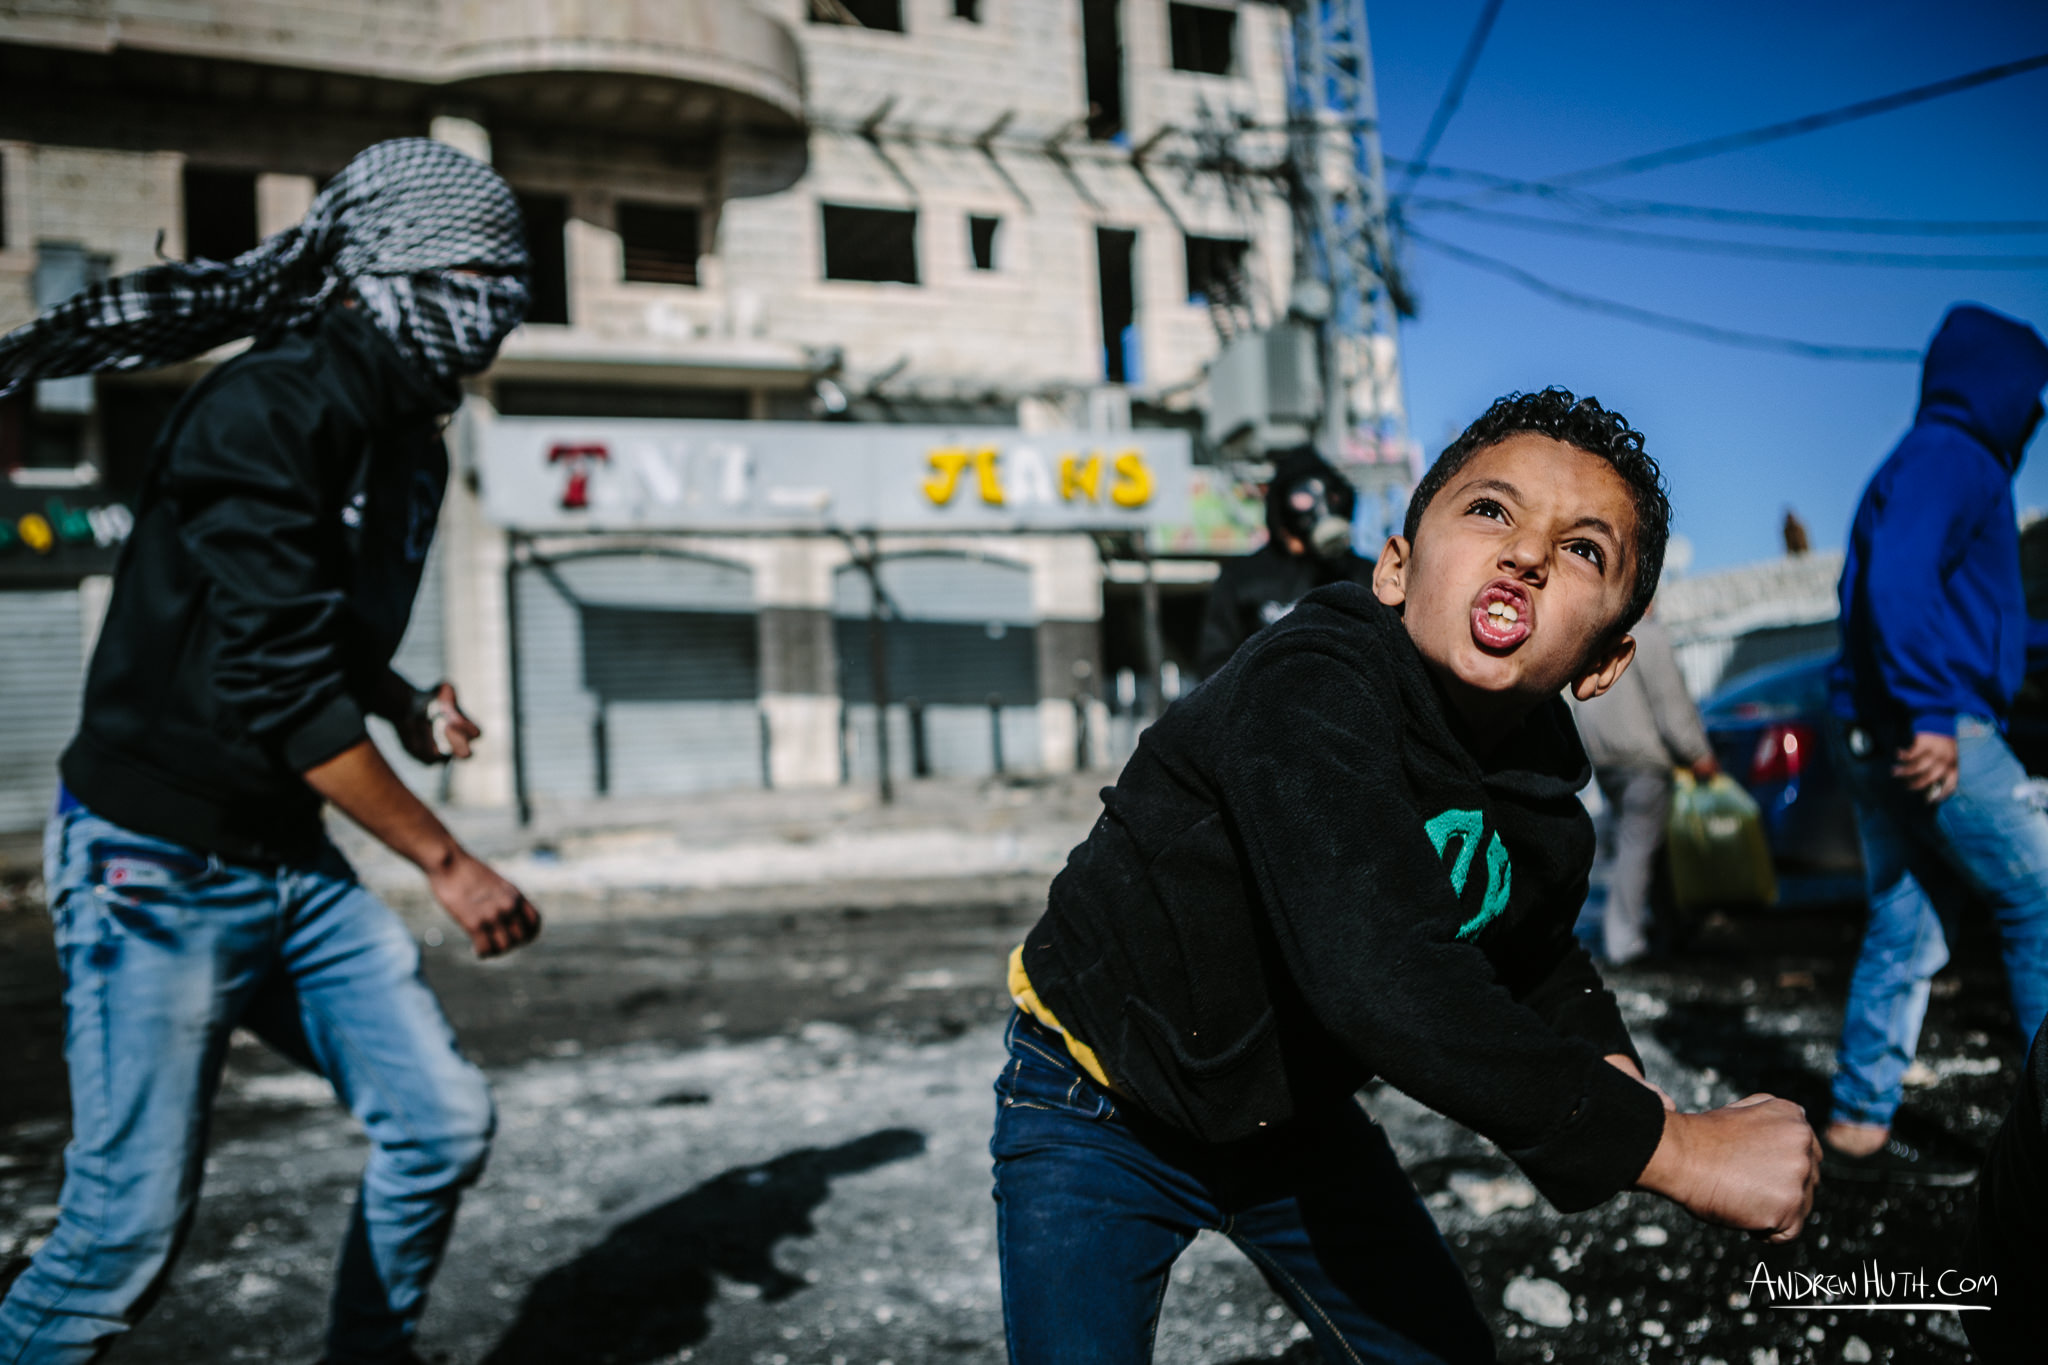  Palestinian youth clash with Israeli military in Shu'afat Refugee Camp in East Jerusalem on Friday, November 7, 2014. &nbsp;The recent, but temporarily total closure of one of Muslim's holiest sites, the Al-Aqsa Mosque, (the first since 1967) and th